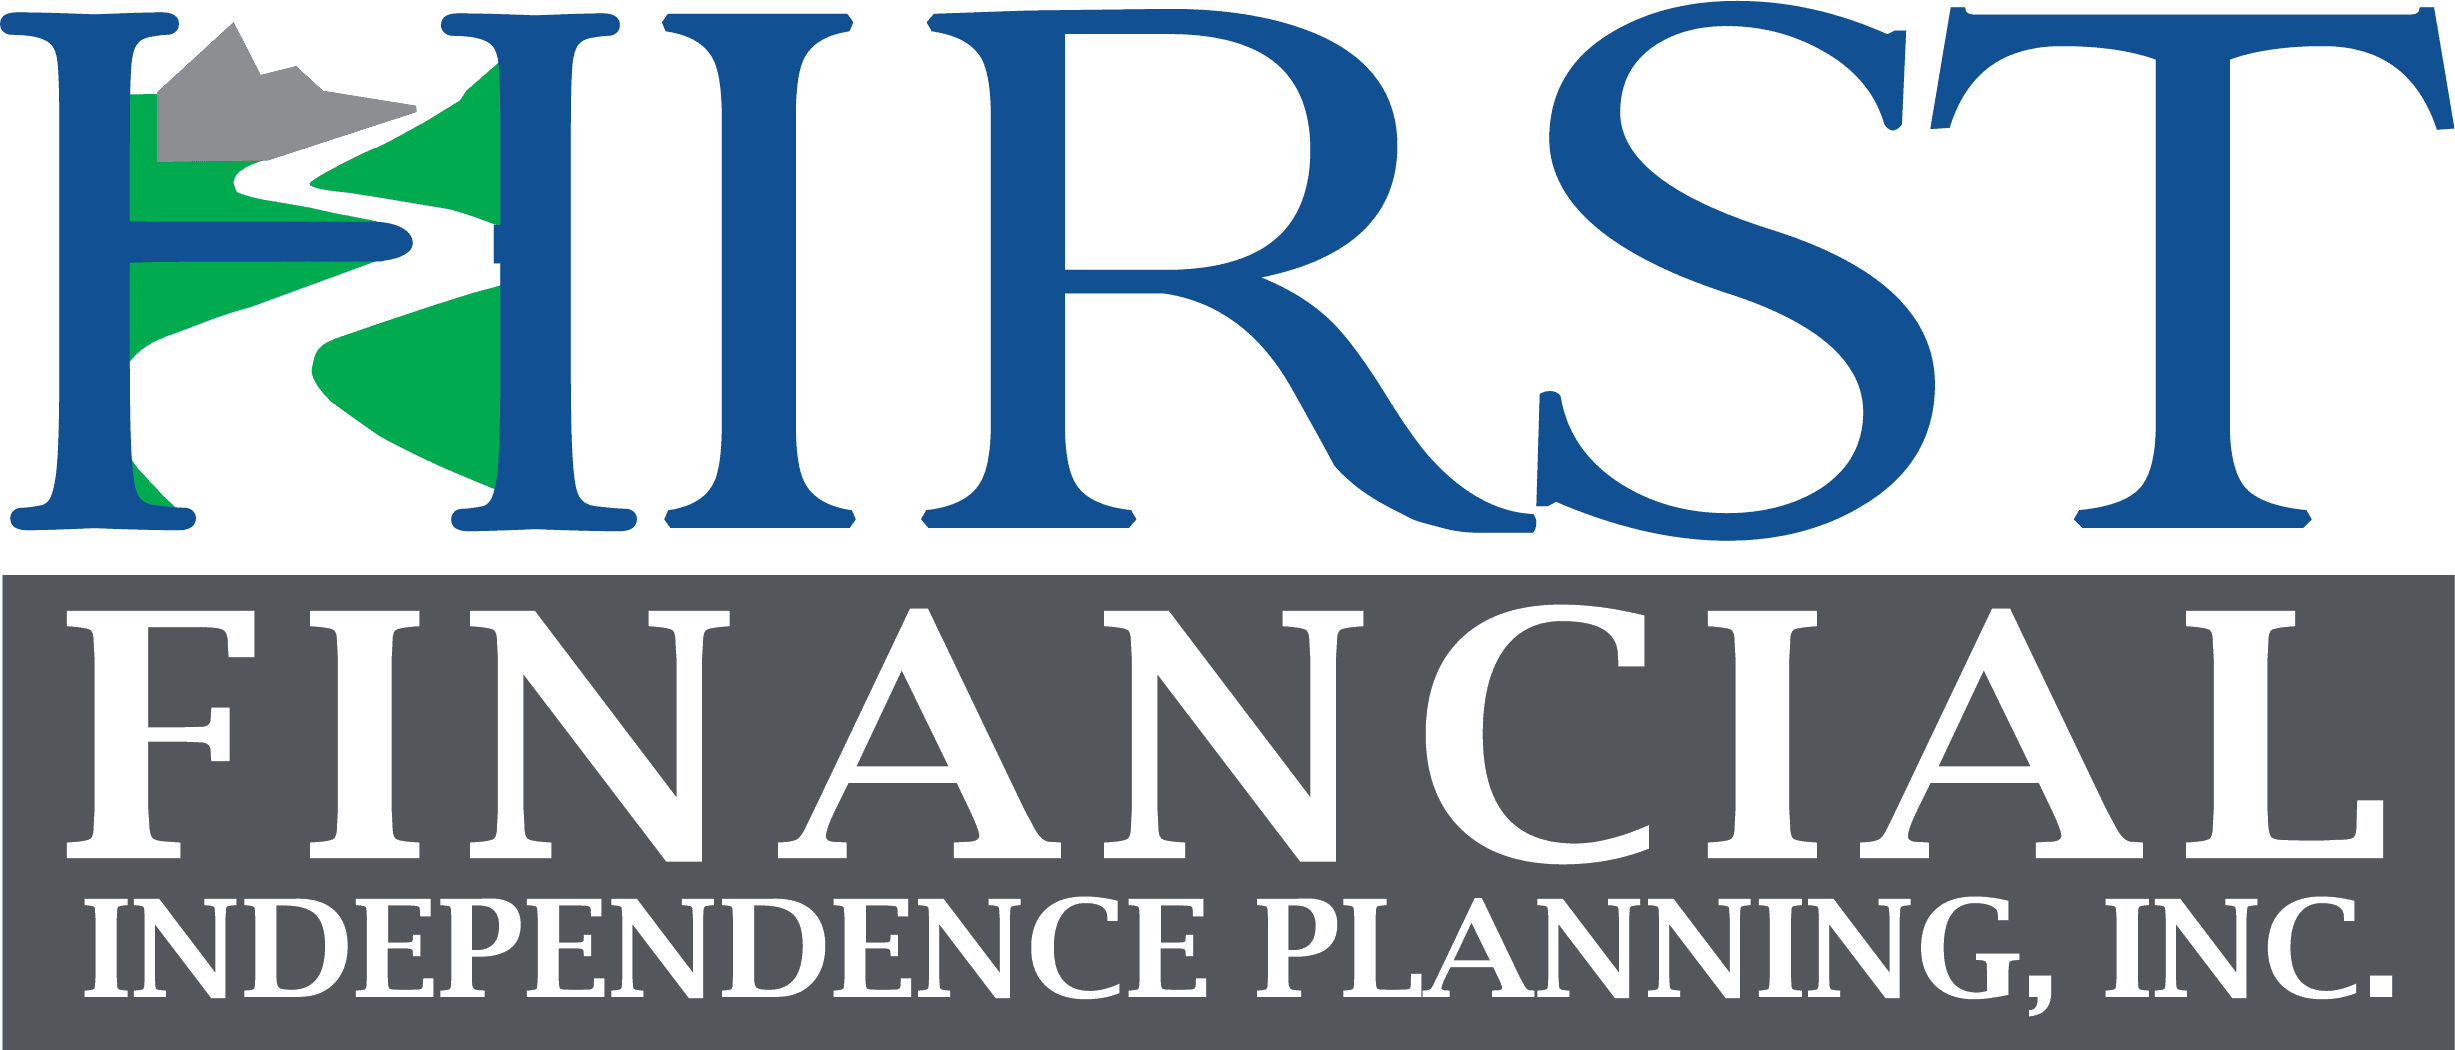 Hirst Financial Independence Planning